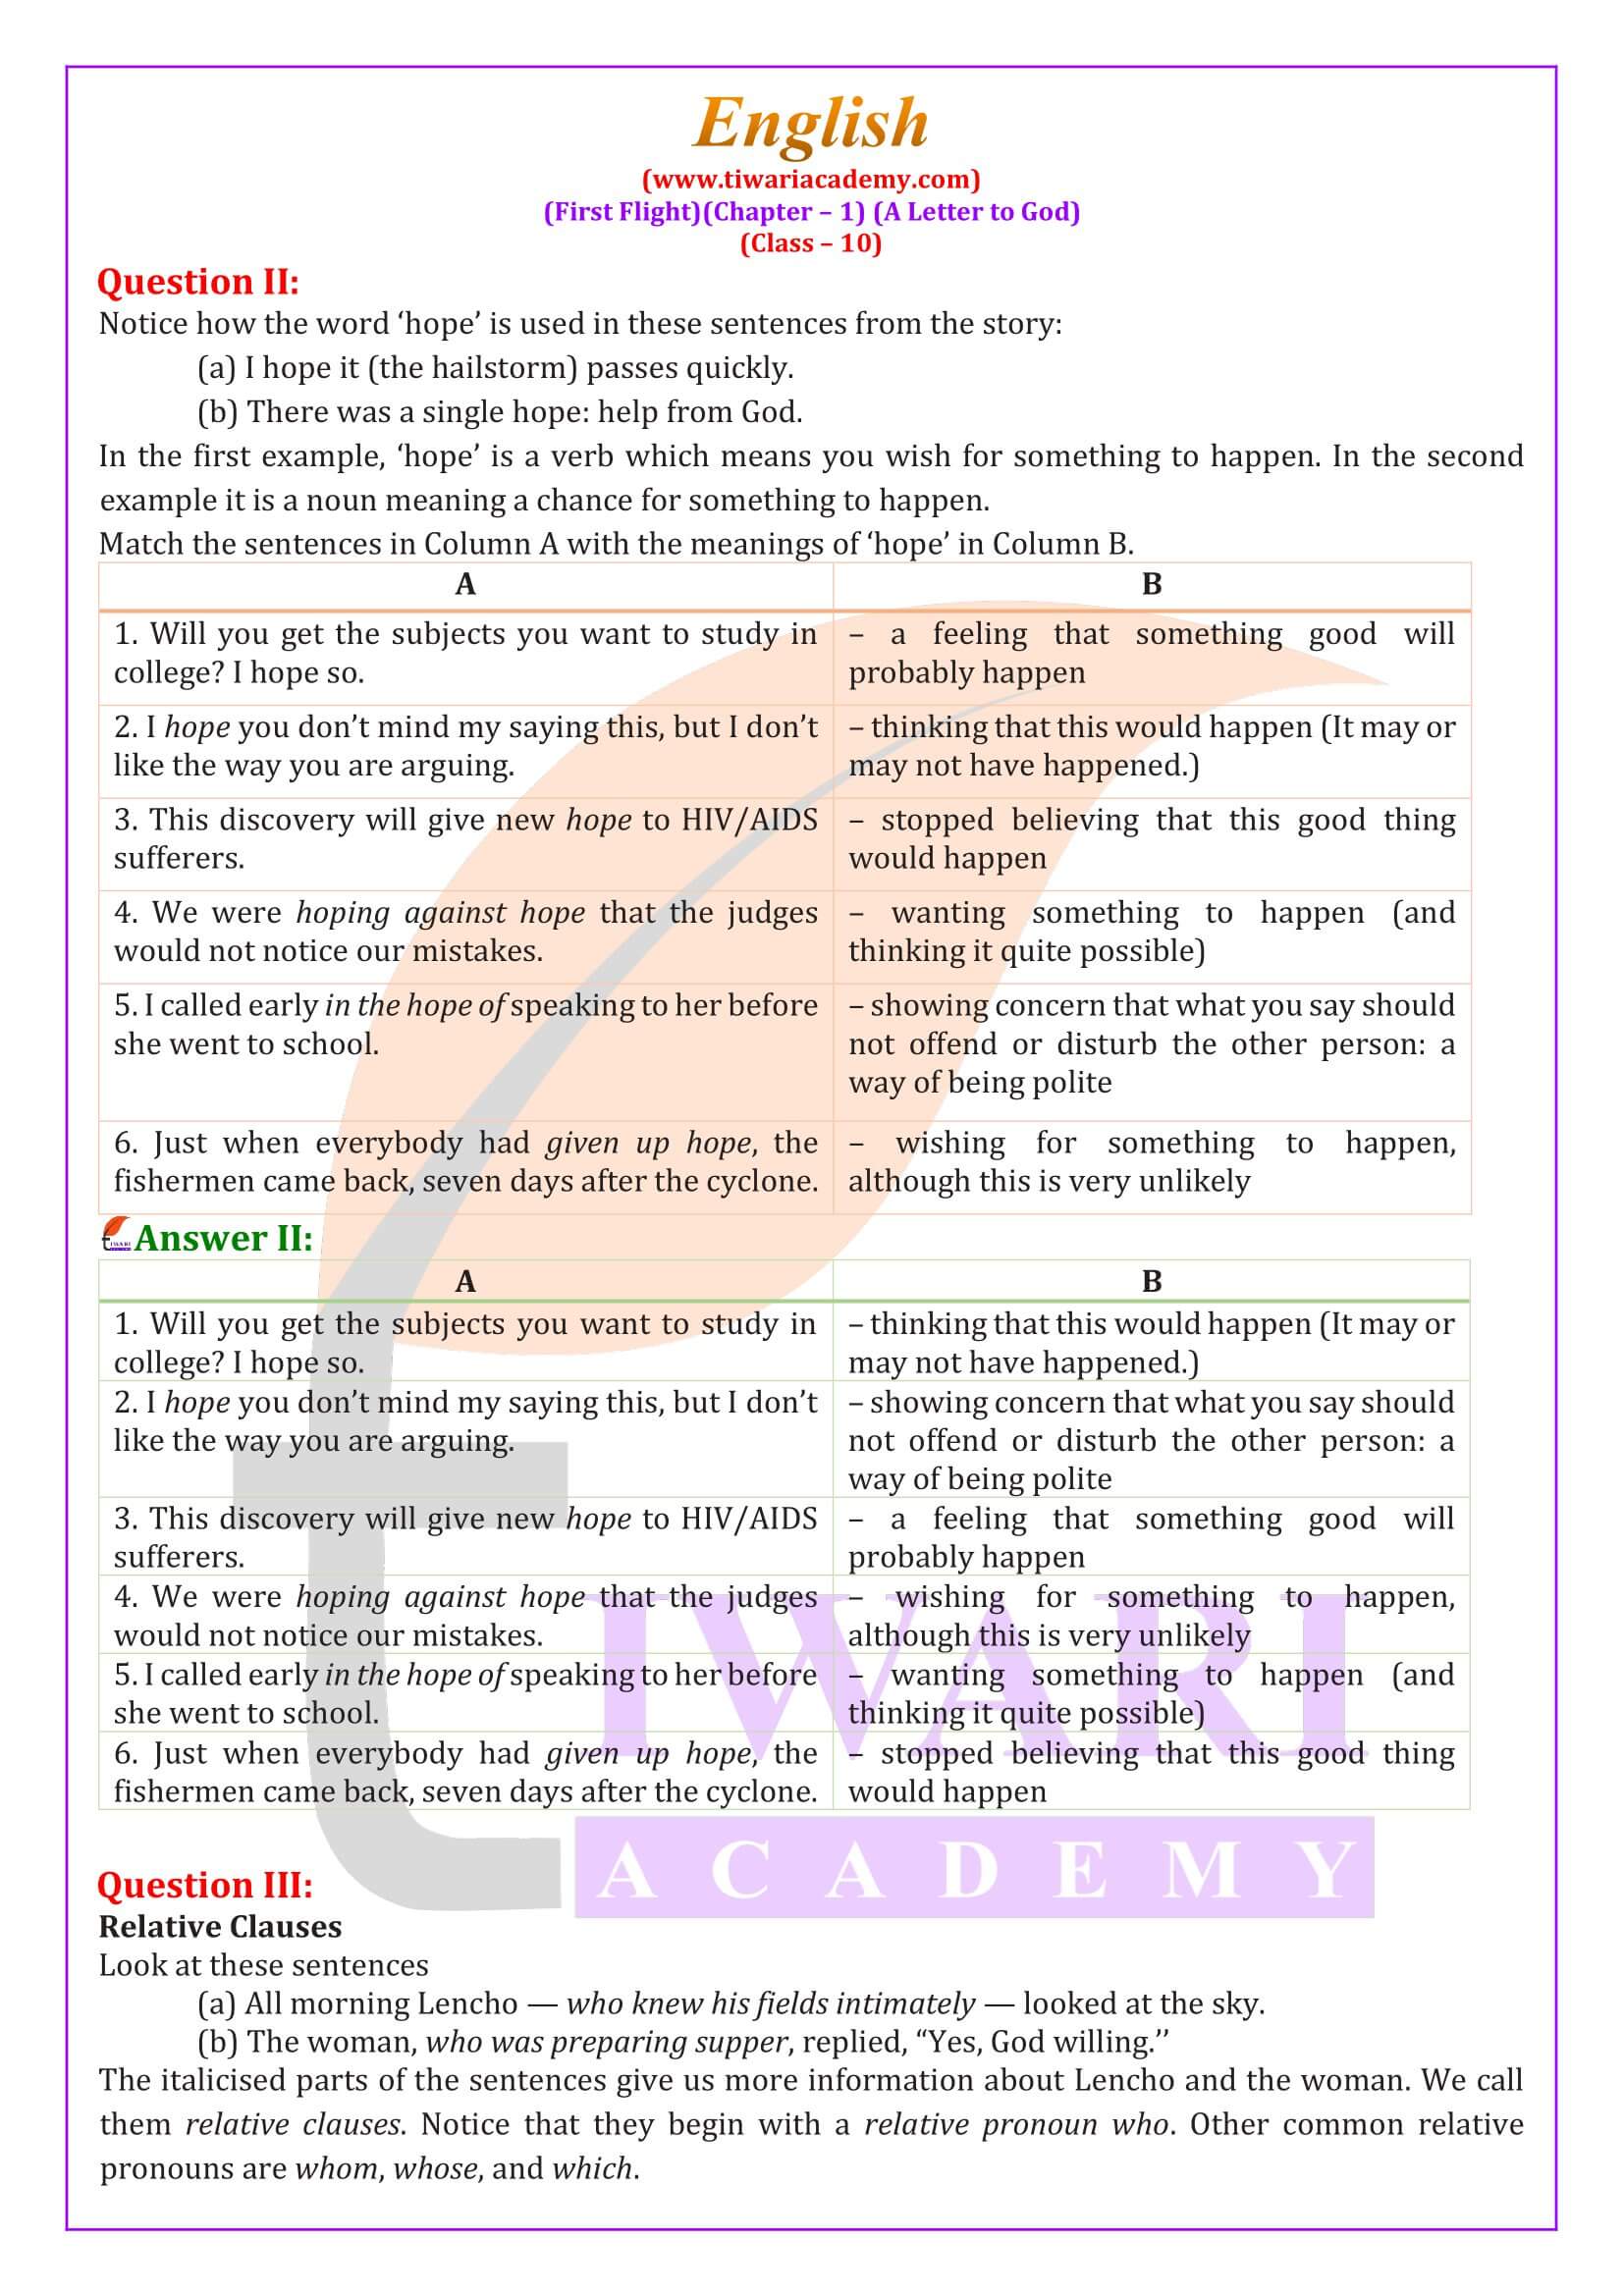 Class 10 English First Flight Chapter 1 A Letter to God question answers